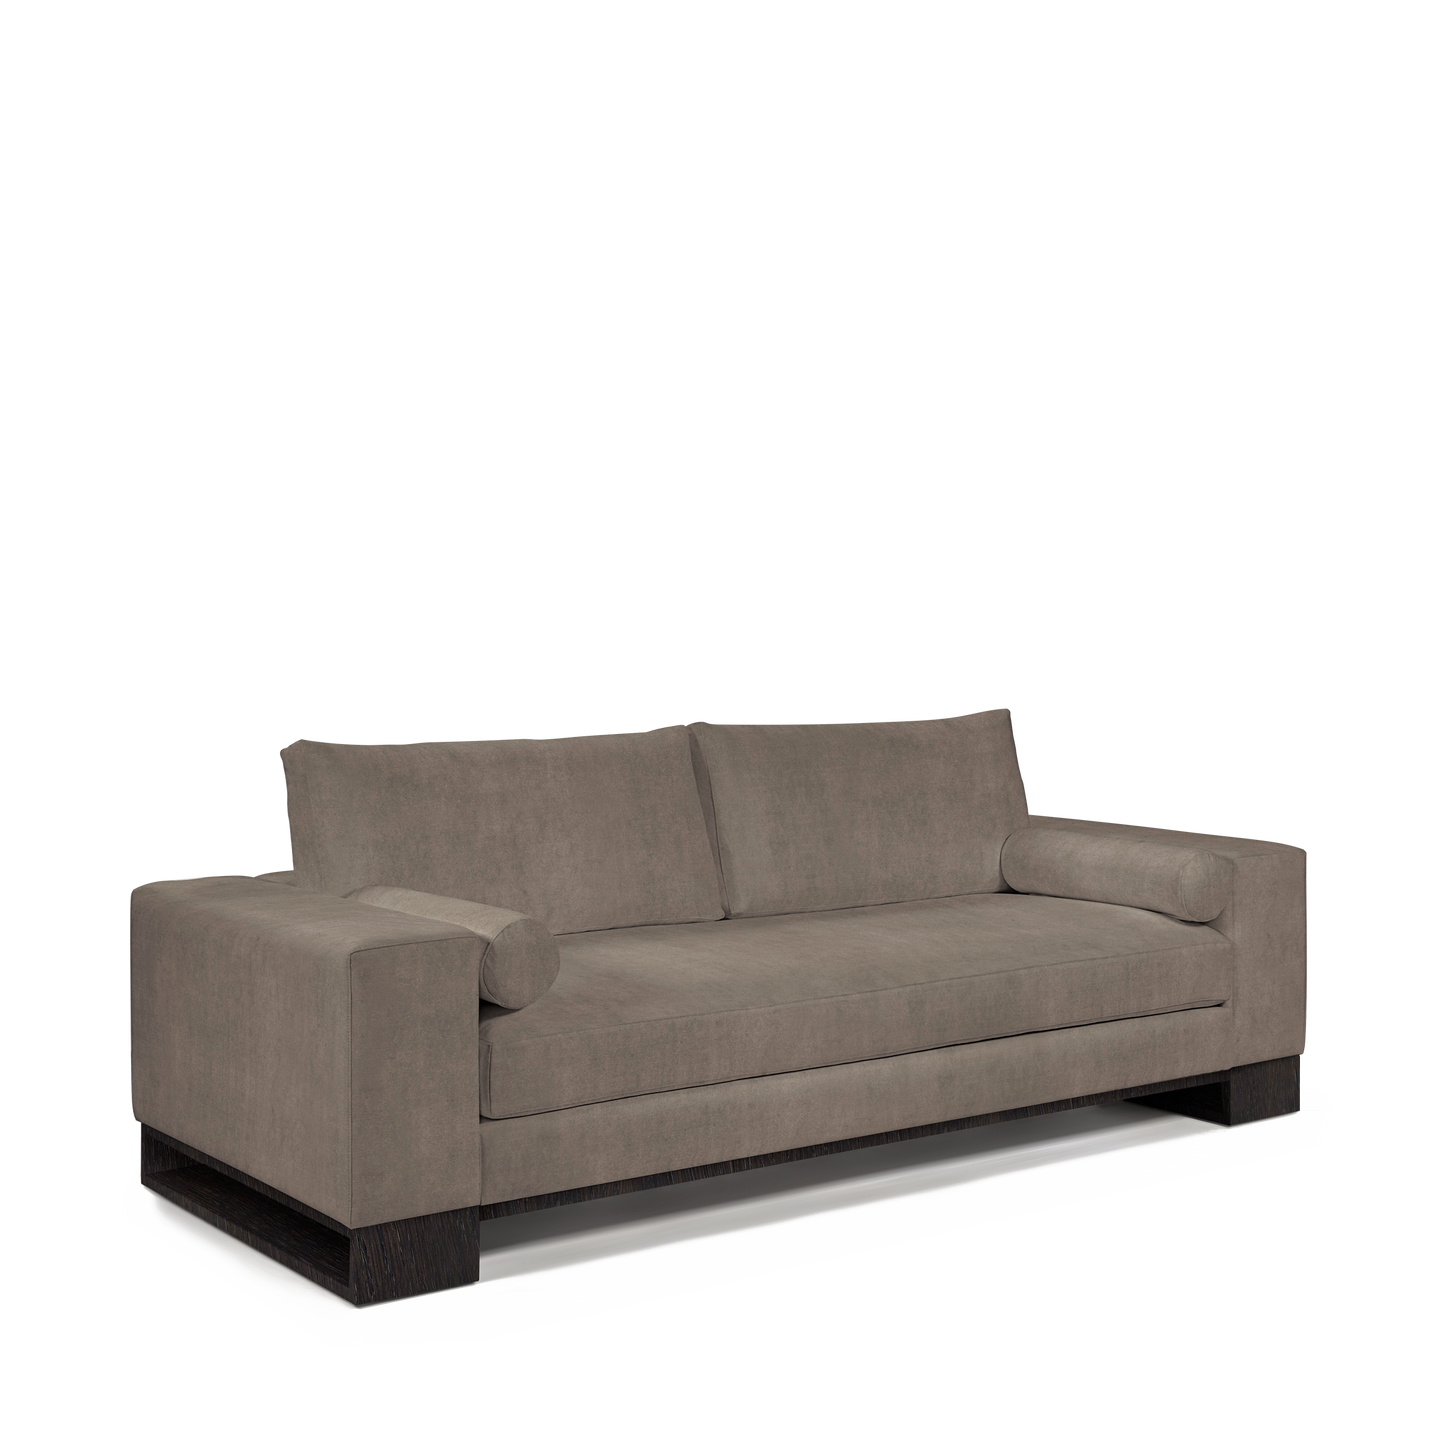 TERRA 2,5-seater sofa with suede grey textile and chocolate wood legs 